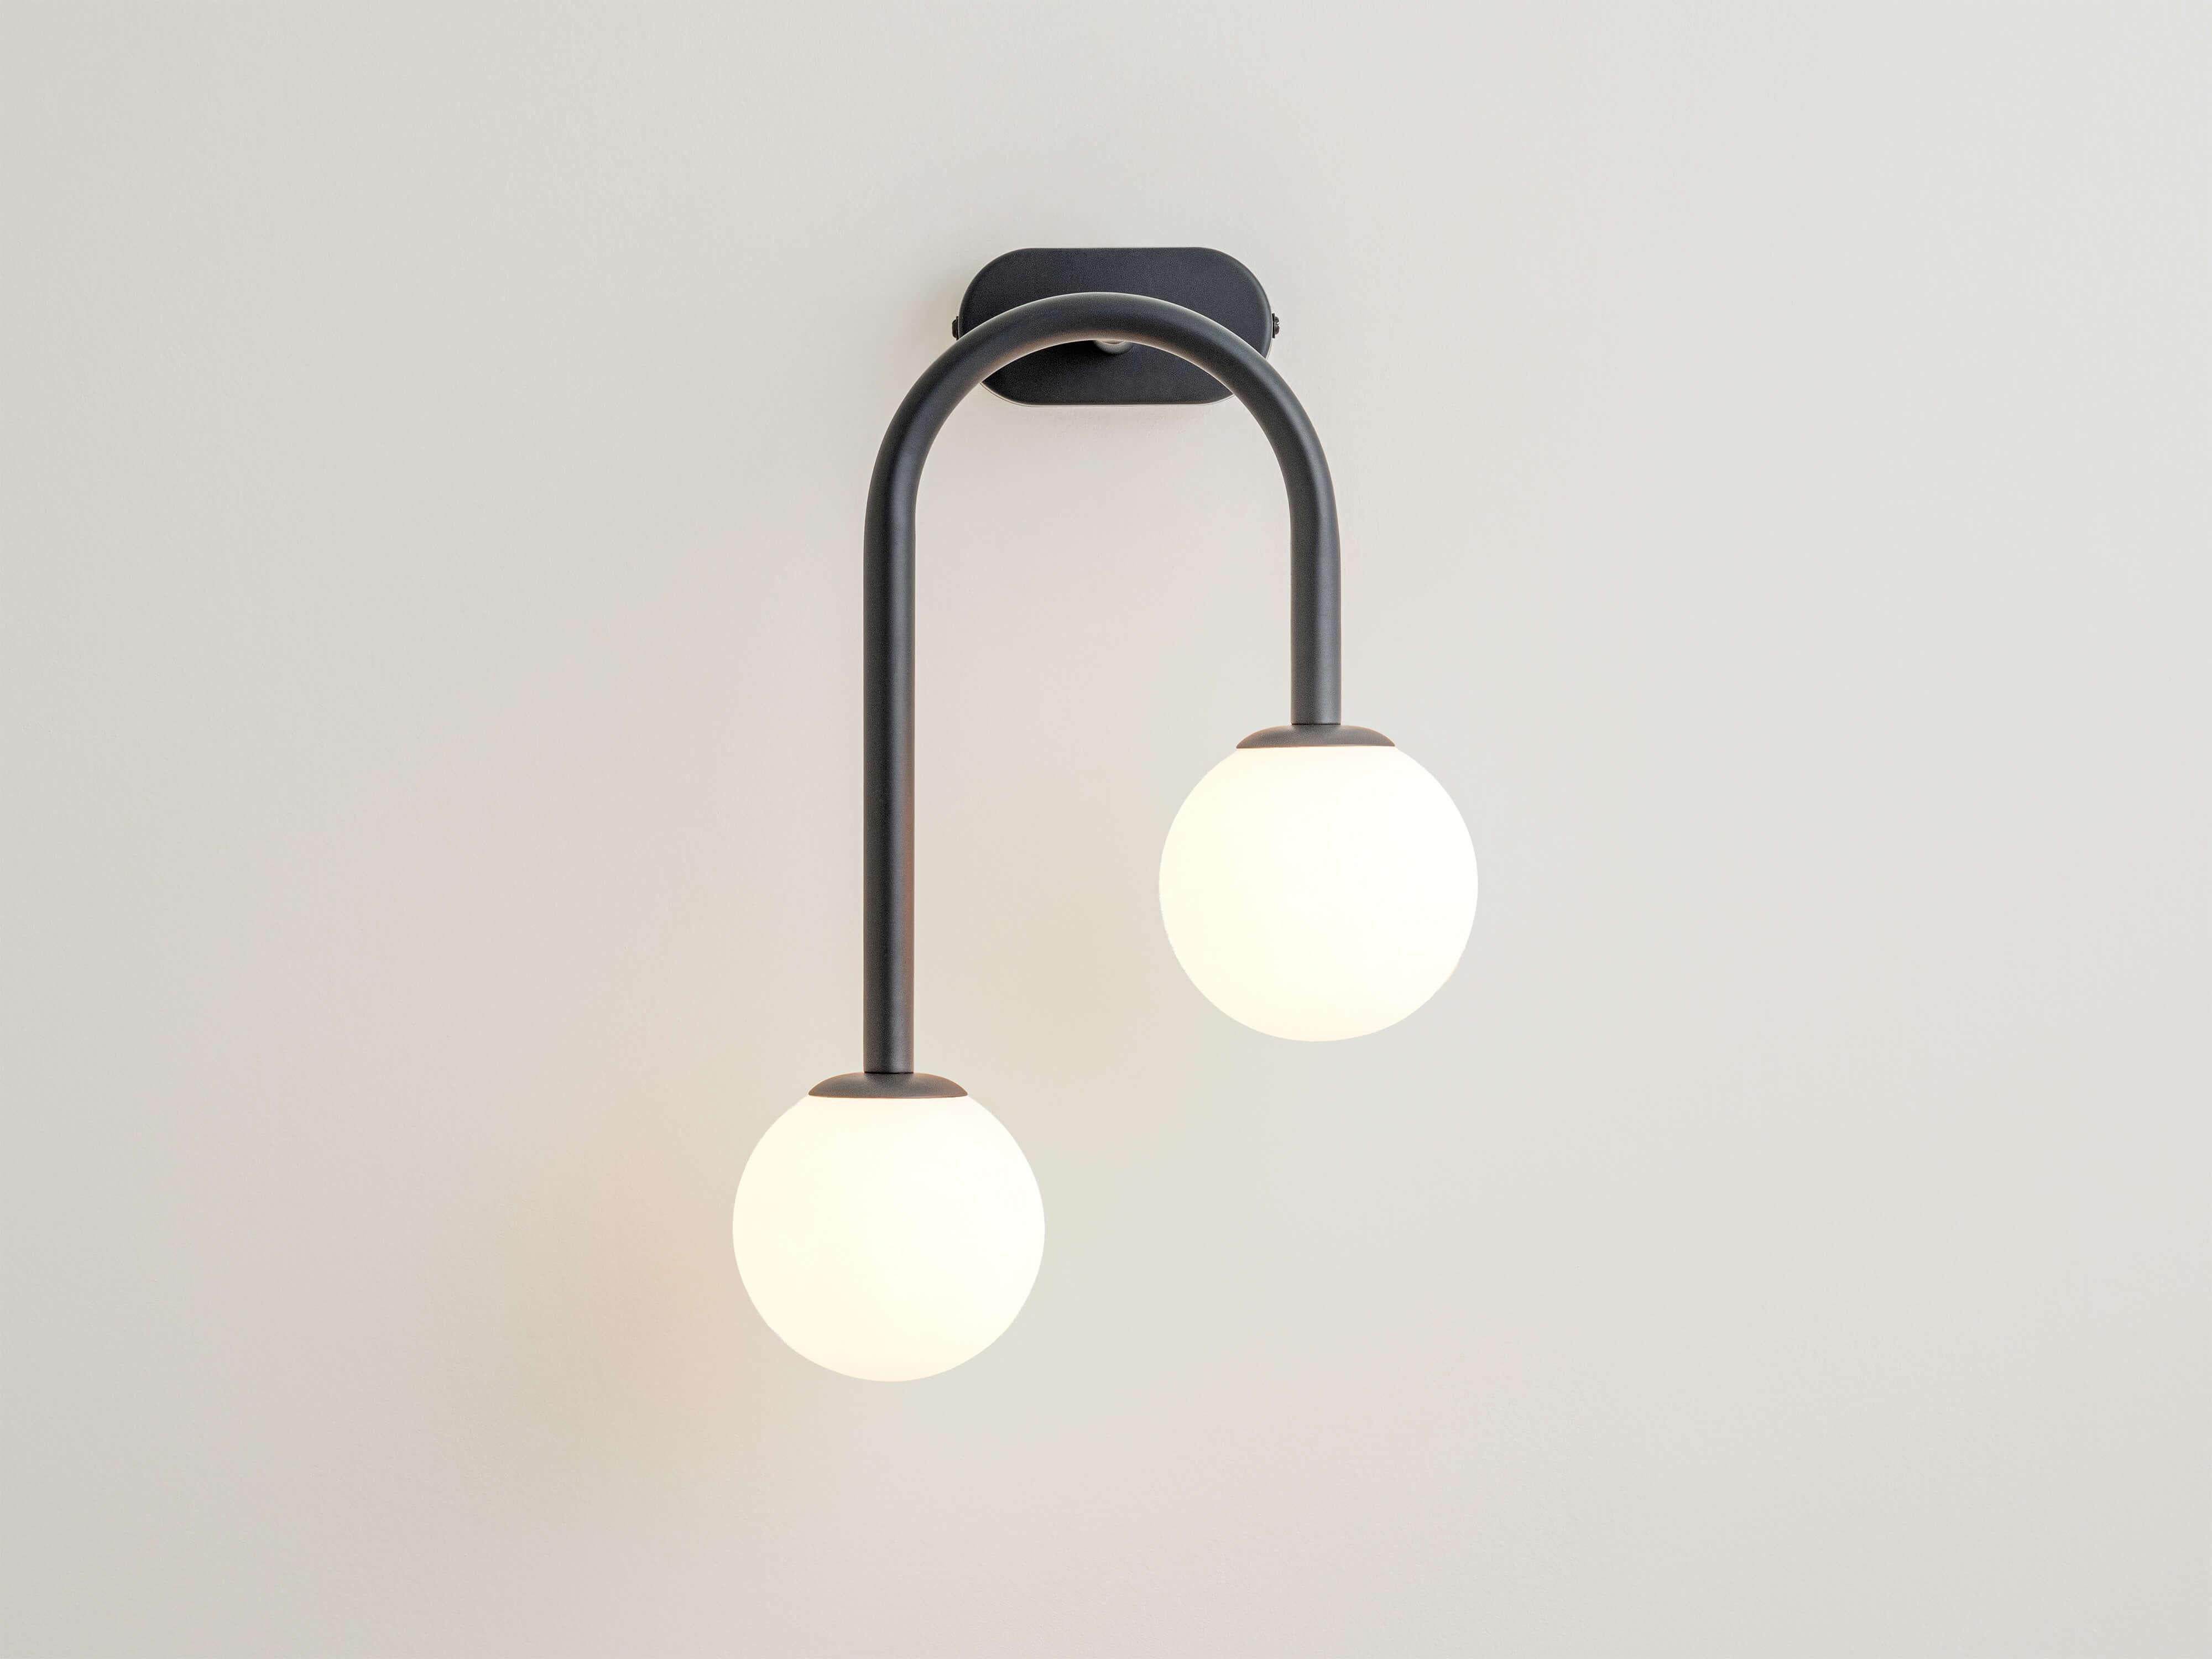 The charcoal drop curve wall light by houseof is a statement piece which will add character to your home. Hang in pairs full maximum impact. Wall lights are a great space saving option and add pockets of light to dark corners. Hung in multiples they